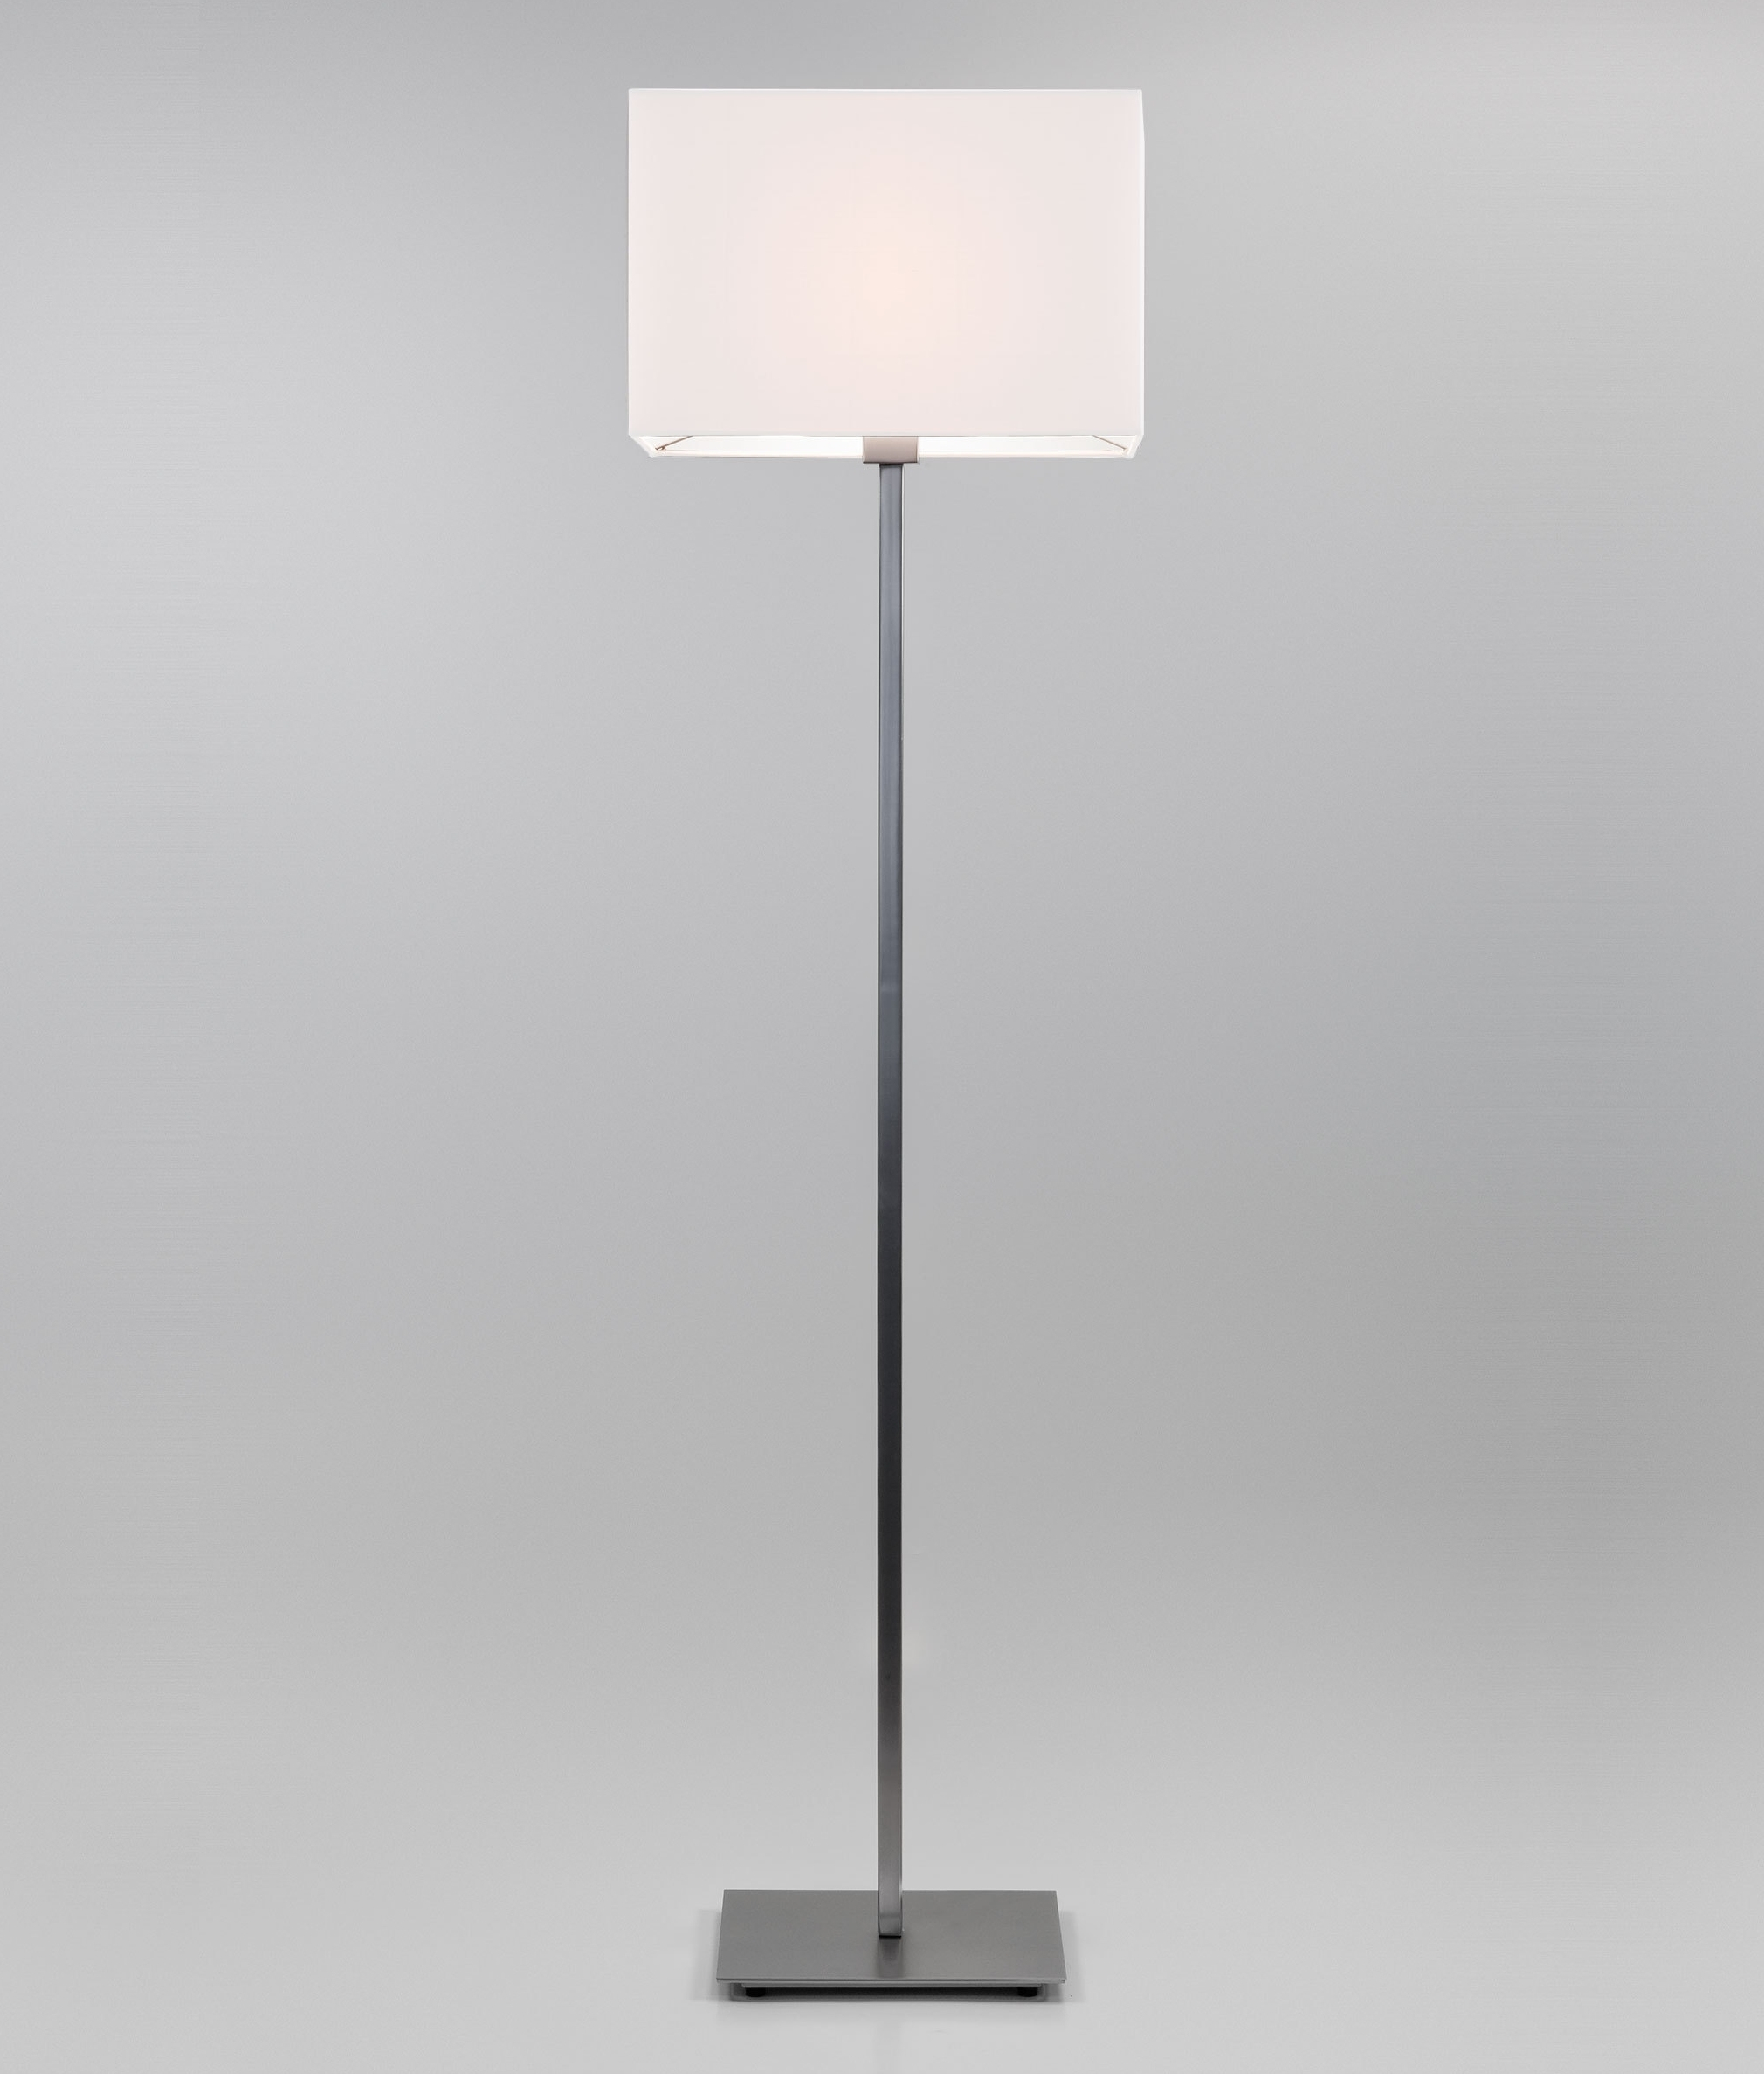 Floor Standing Lamp Square Stem In Nickel Or Bronze Finish intended for size 2020 X 2375